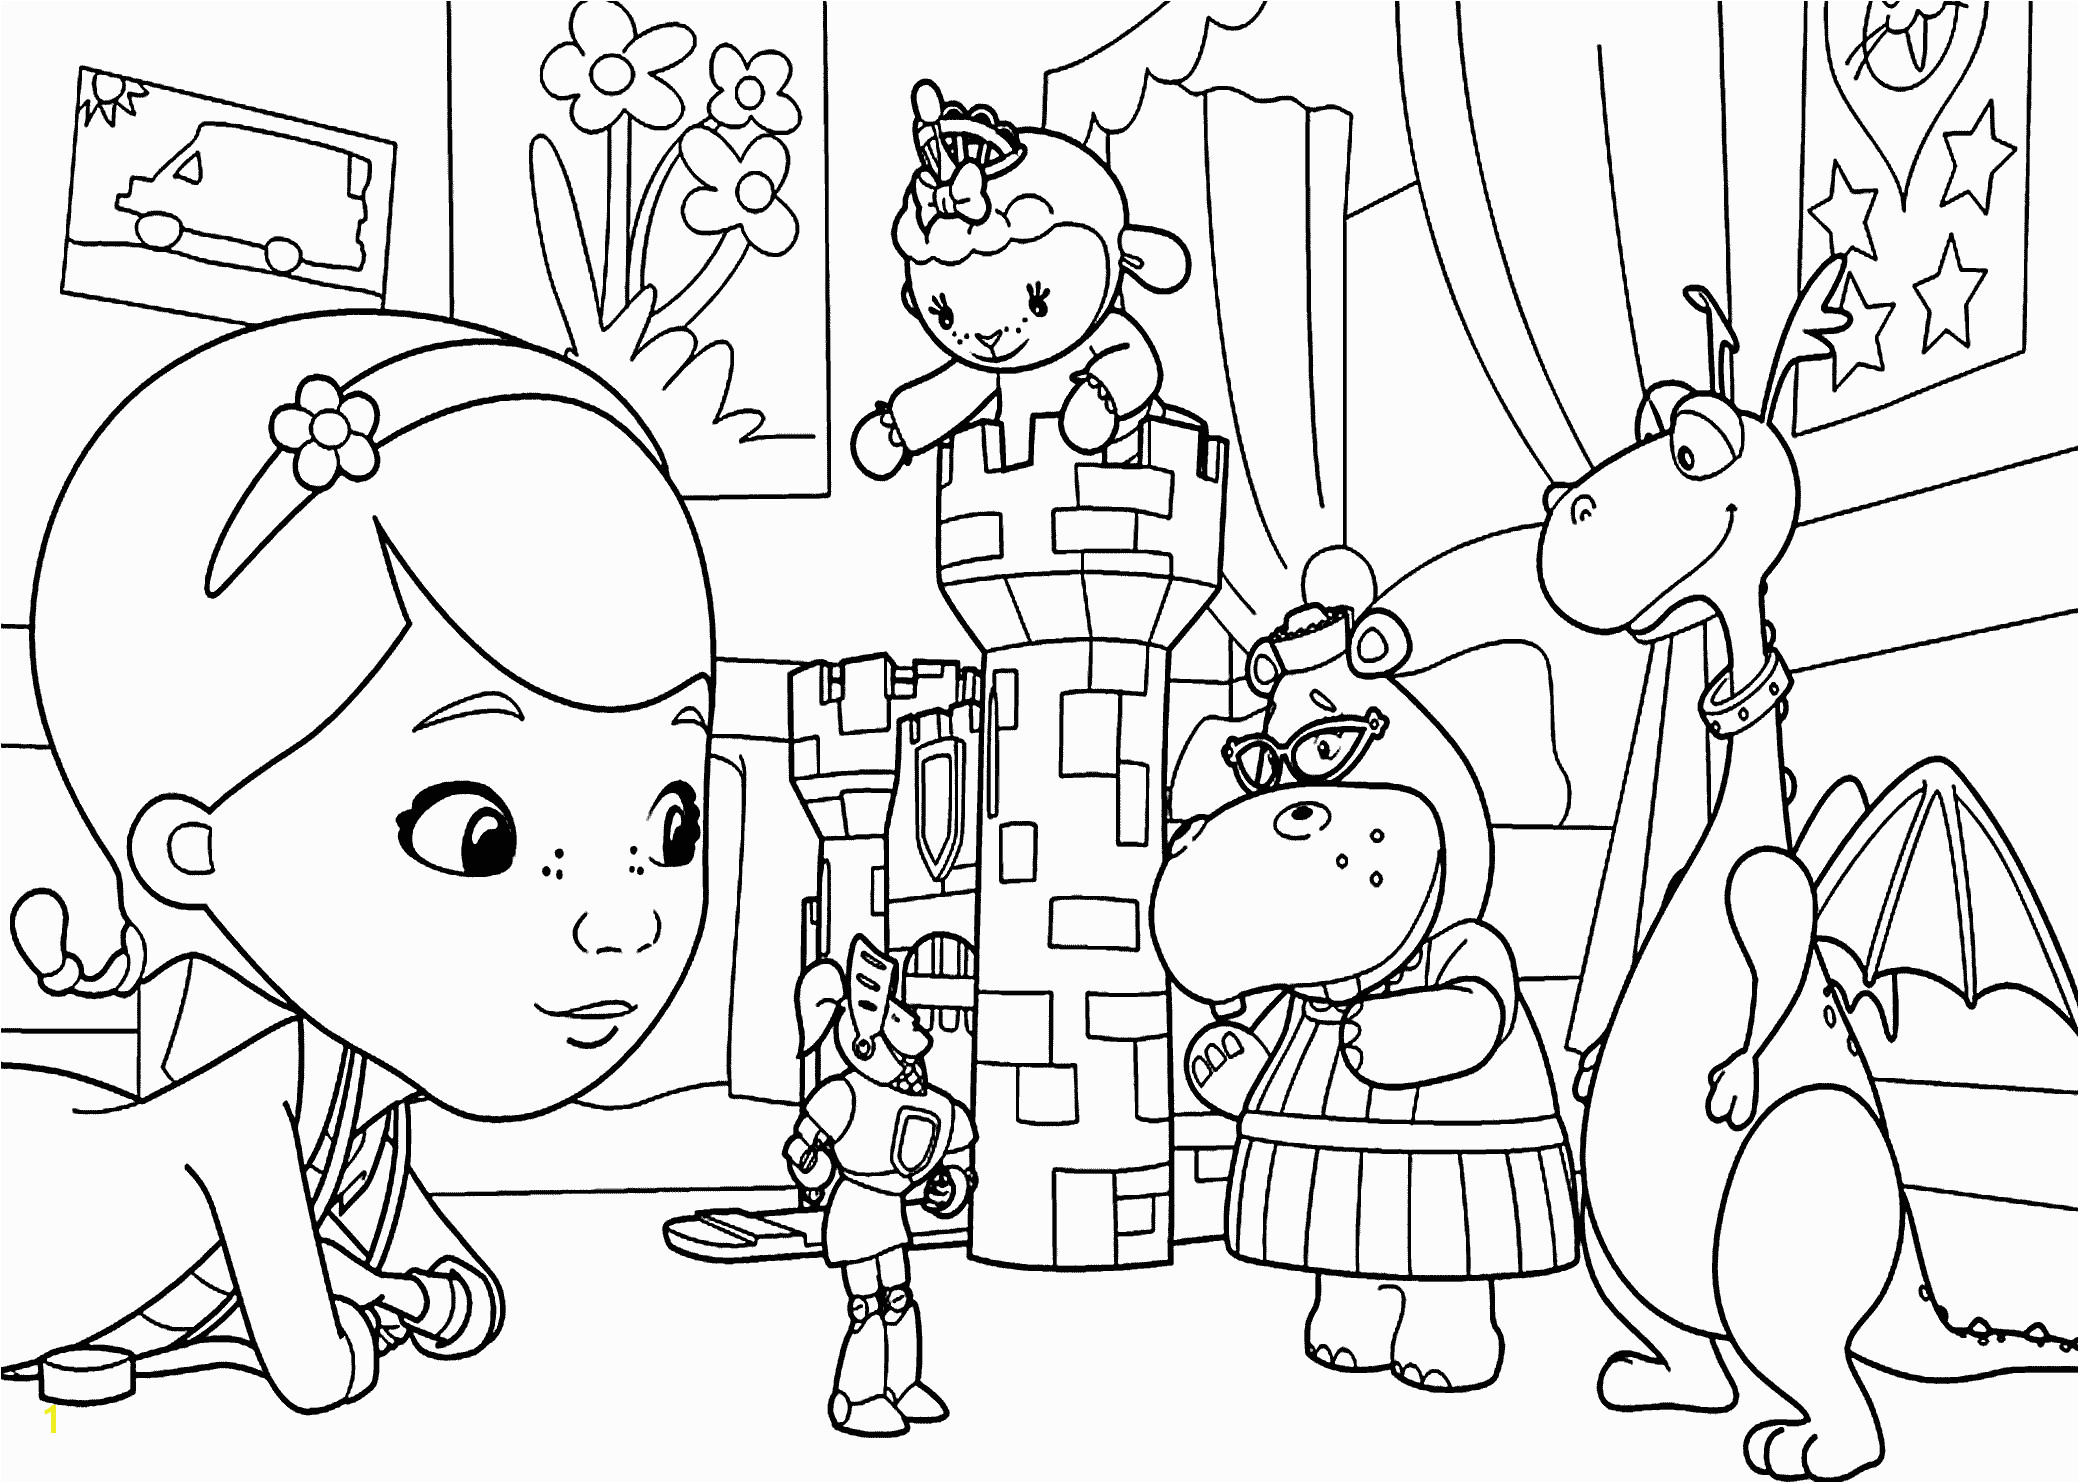 Doc McStuffins theater coloring pages for kids printable free Disney cartoons